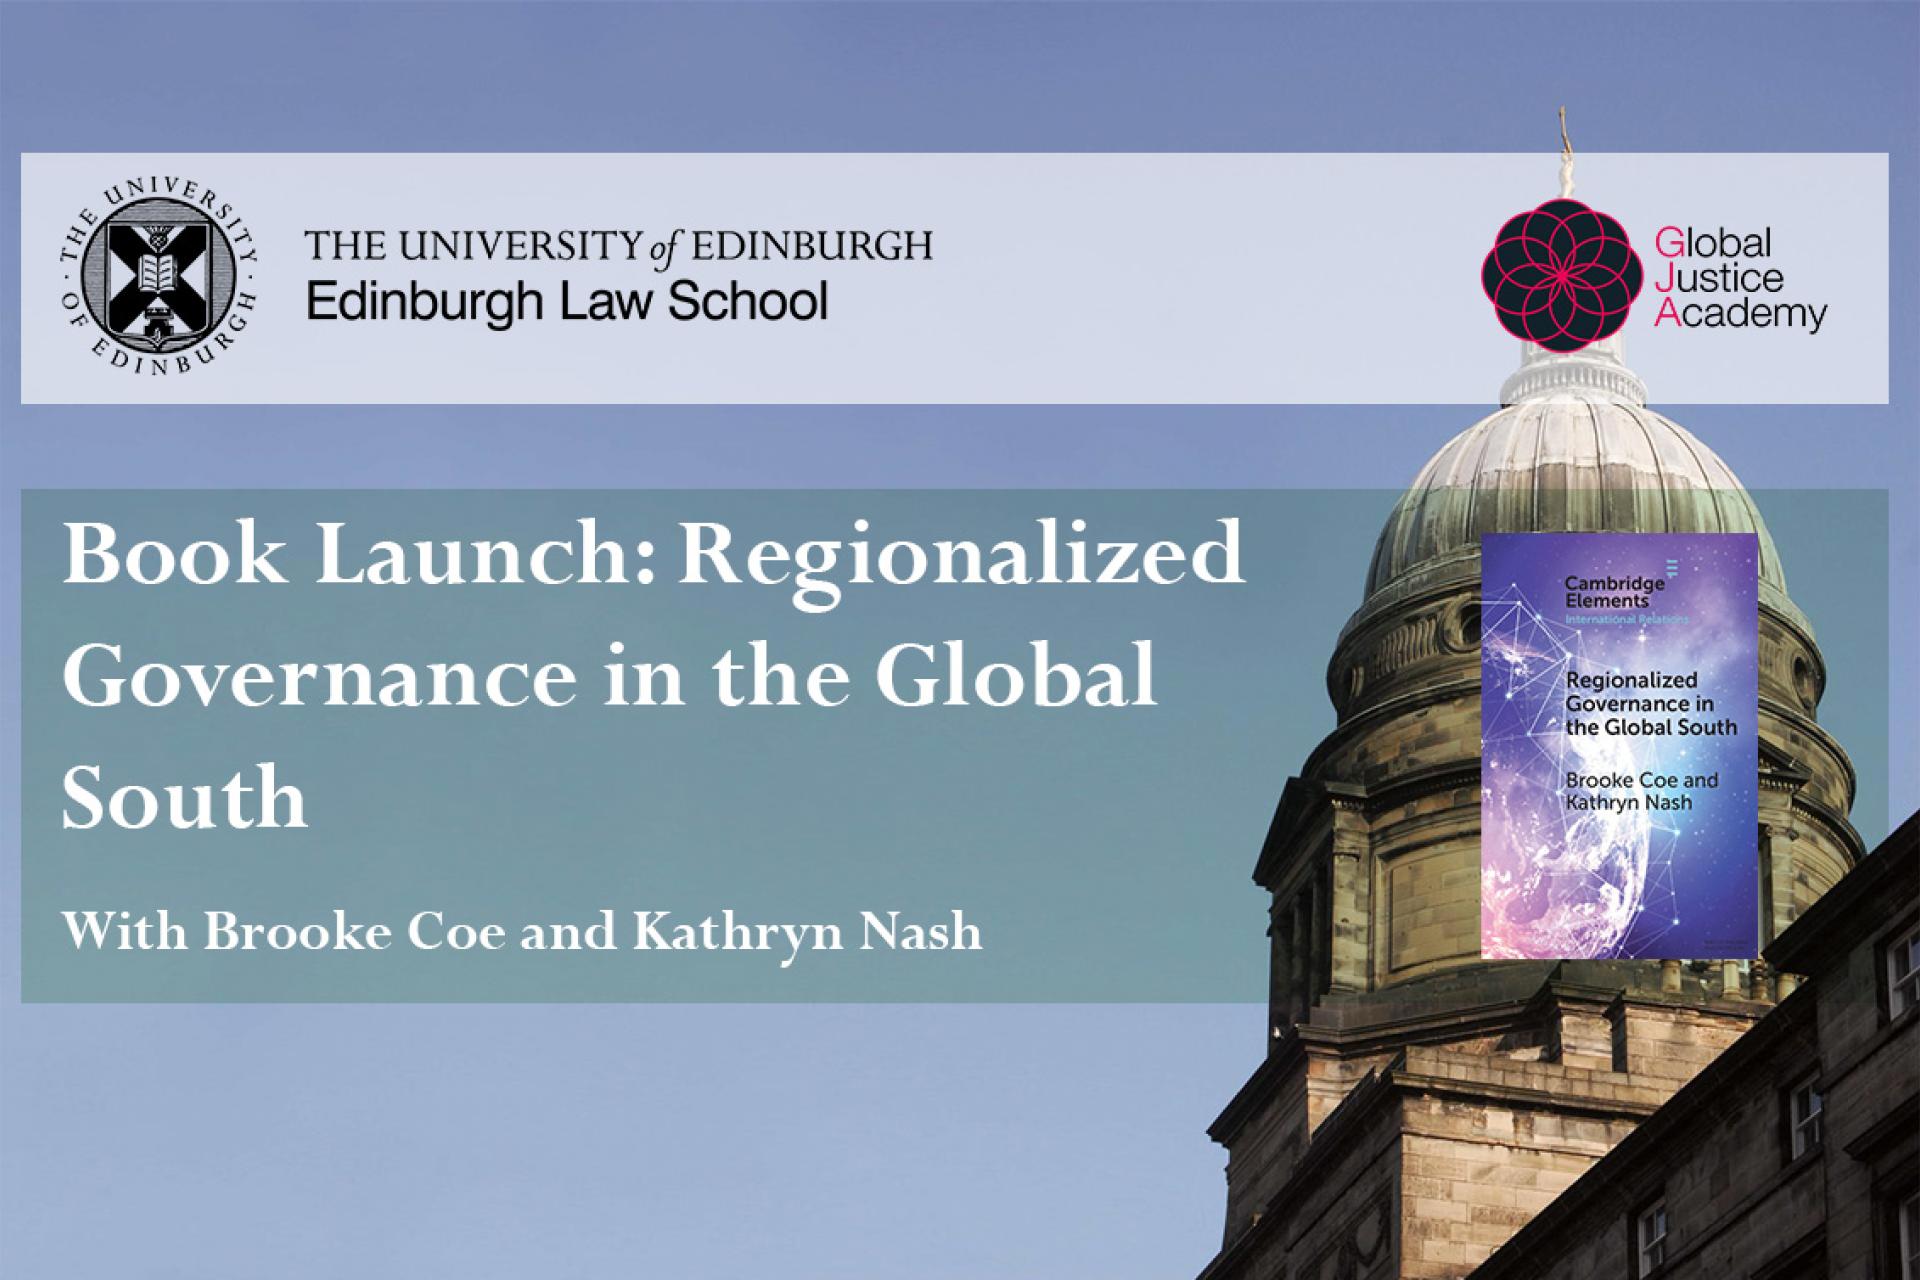 Book Launch: Regionalized Governance in the Global South